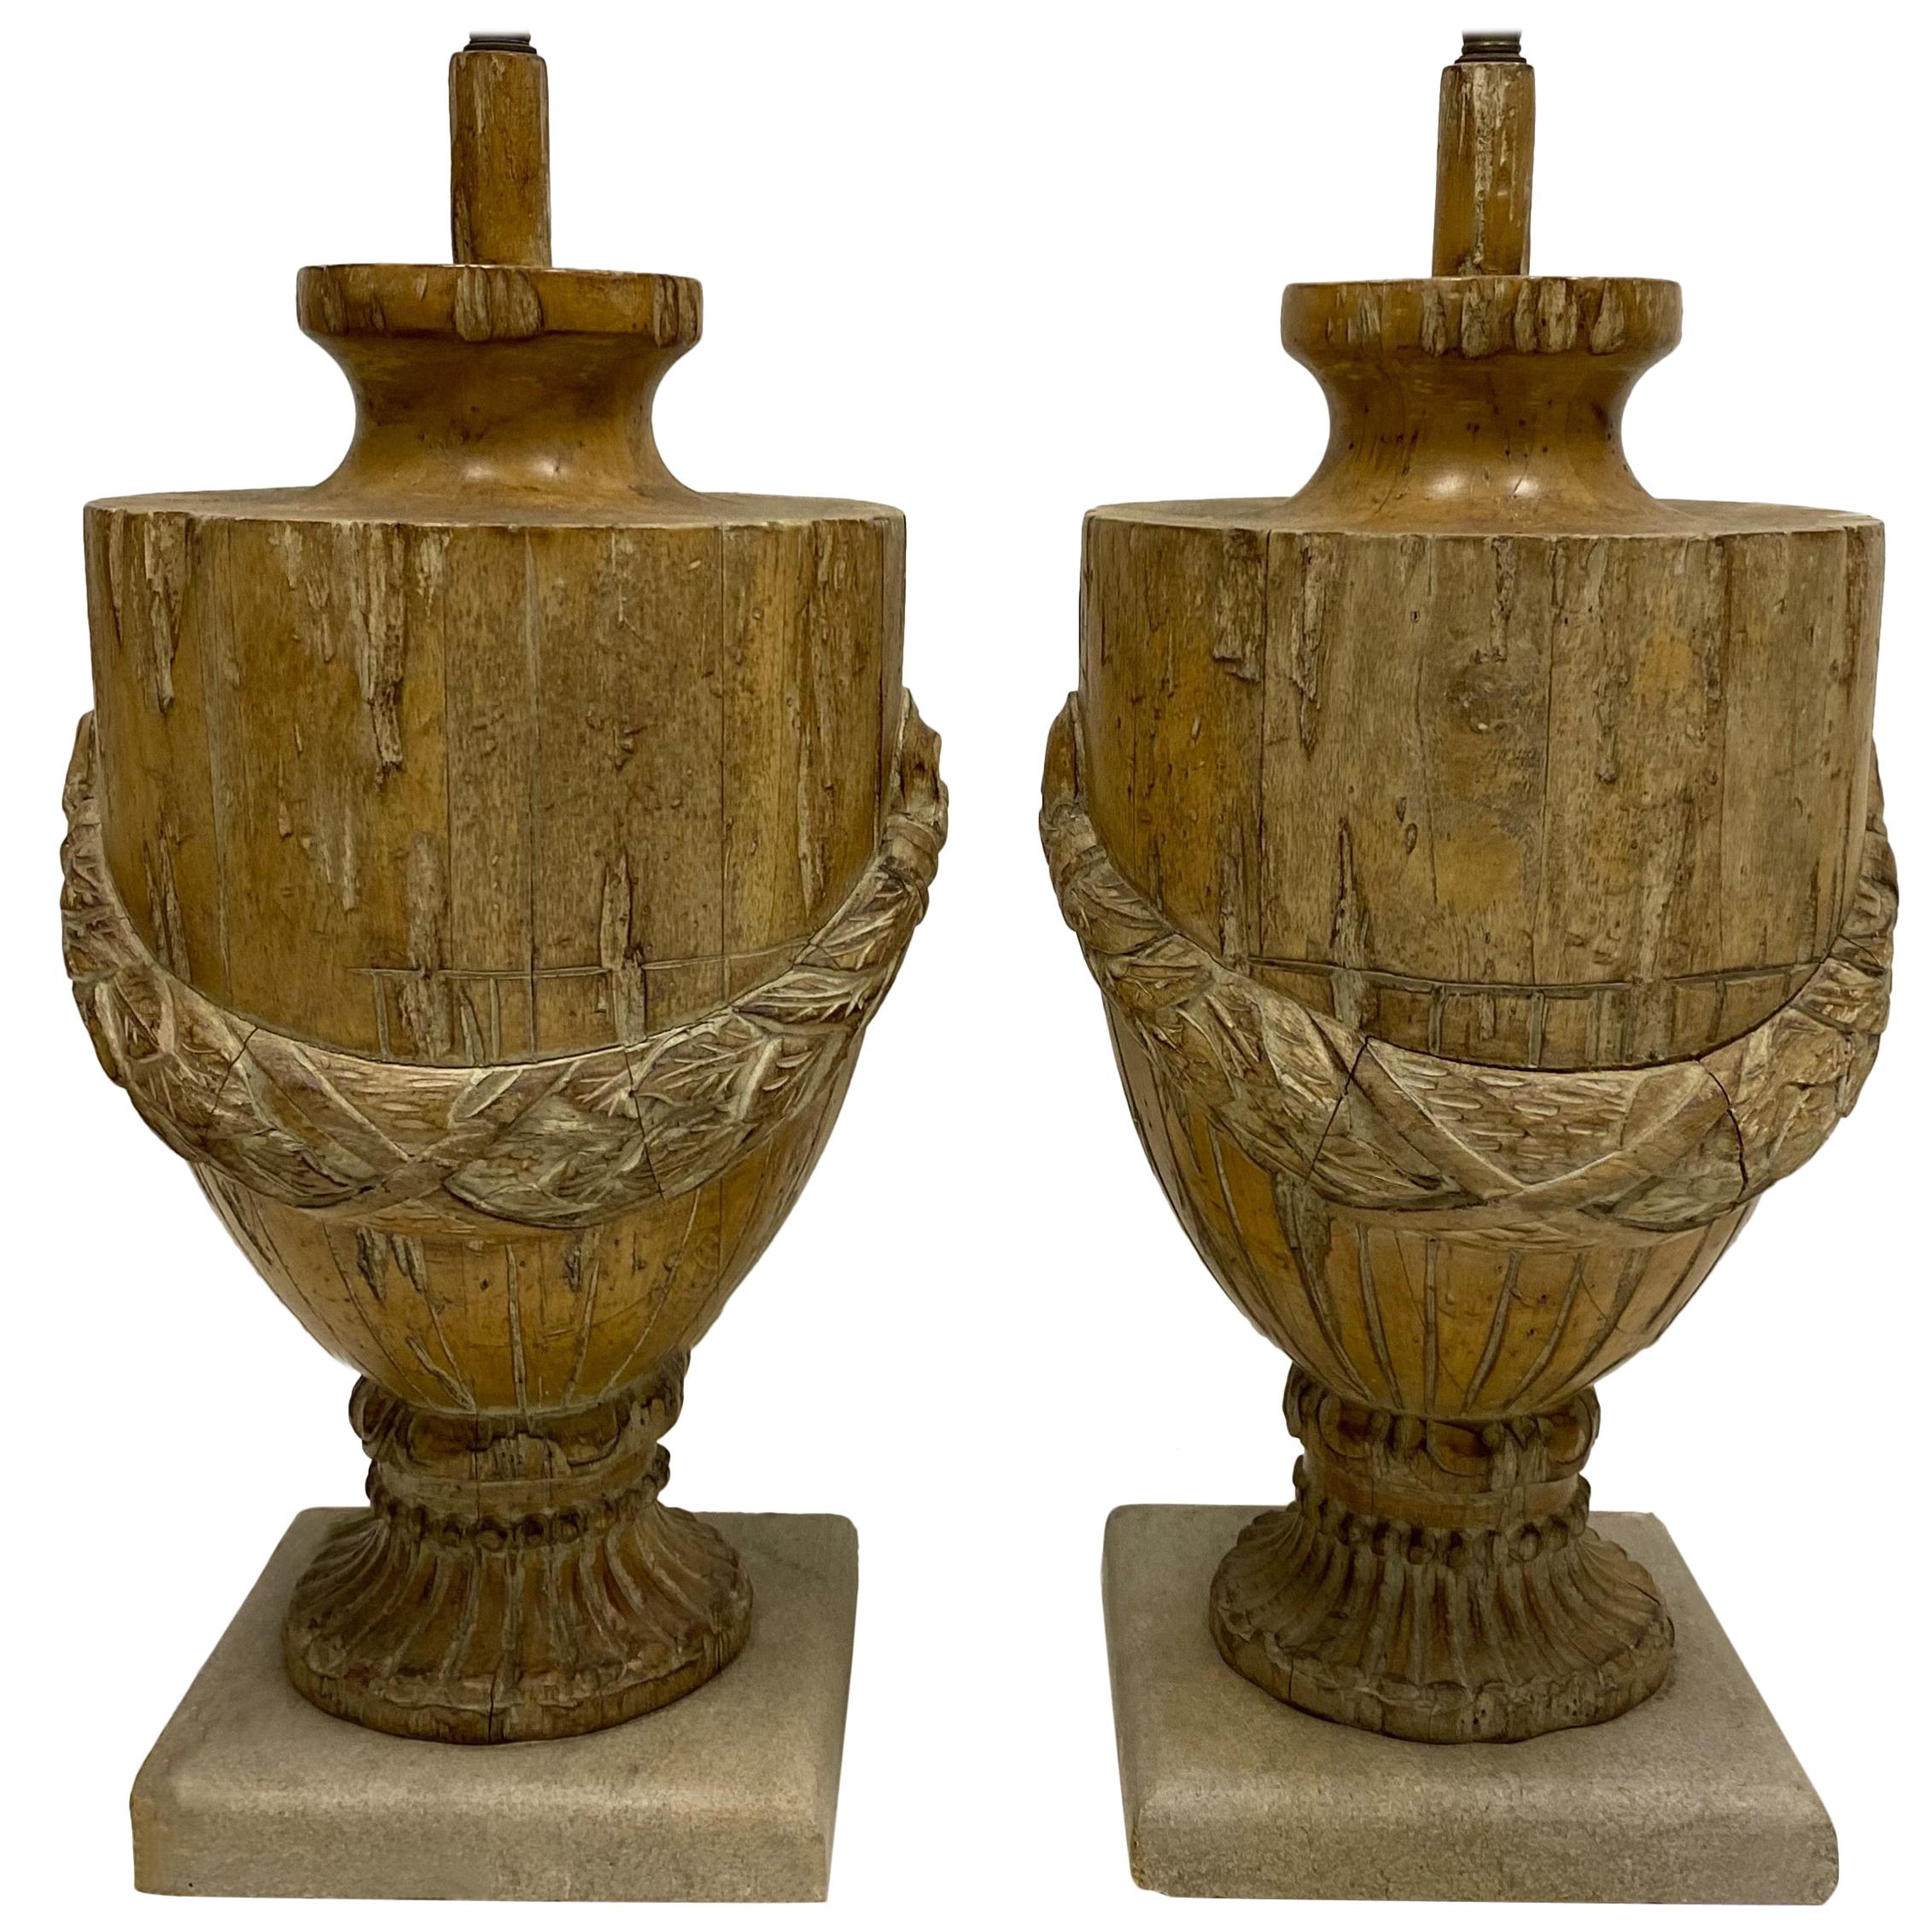 Pair of 19th Century French Carved Urn Form Lamps with Neoclassical Styling